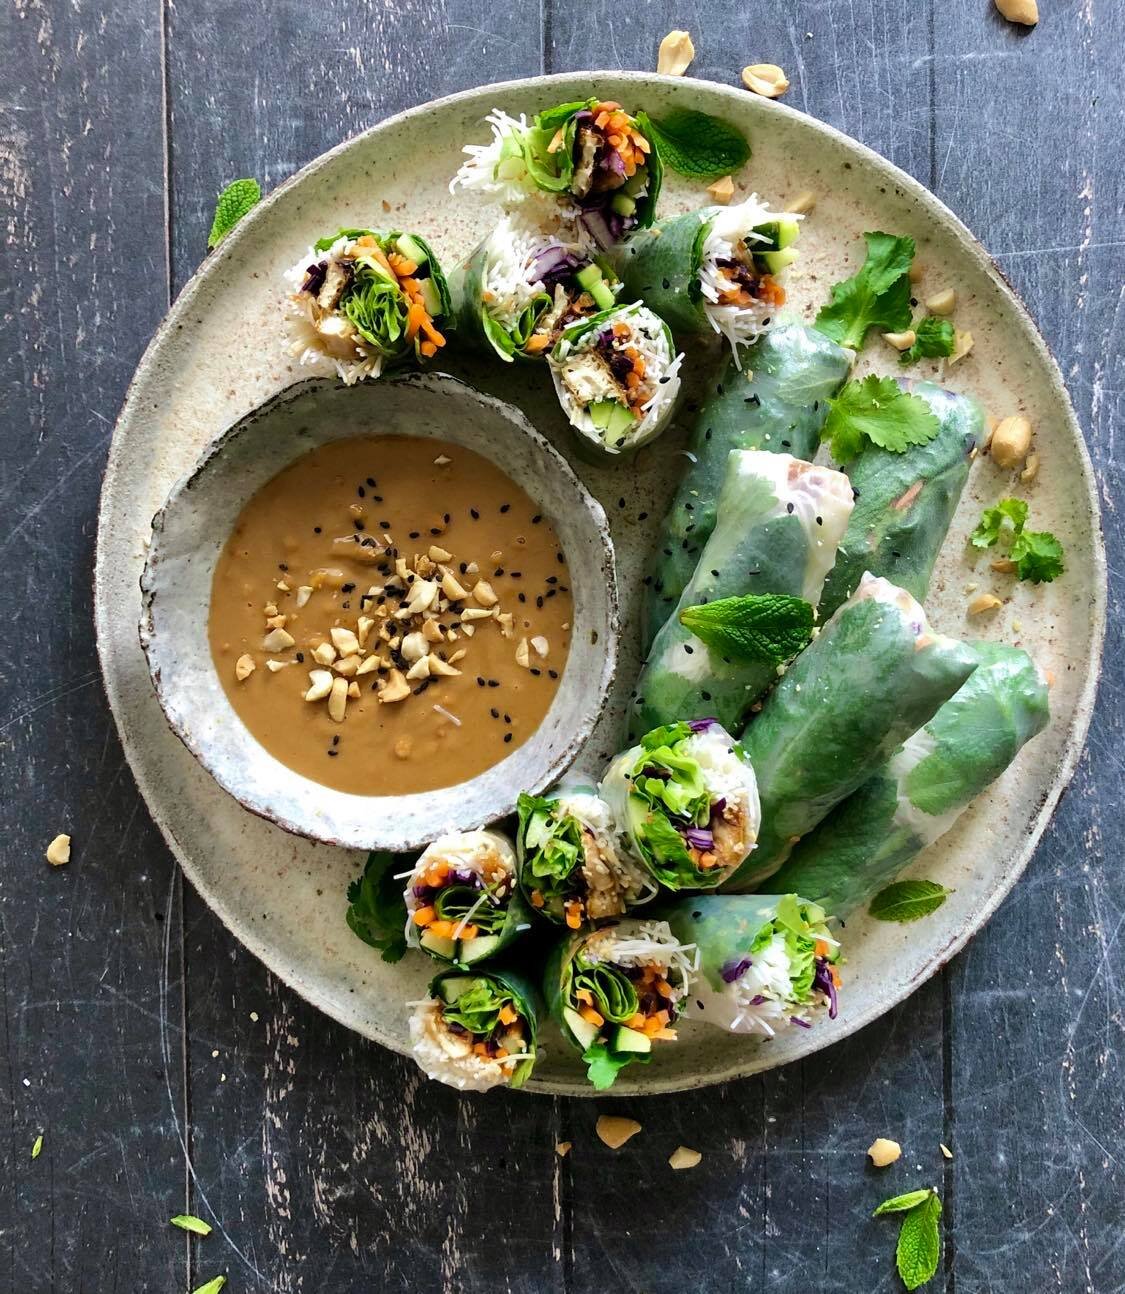 Vegan Rice Paper Rolls with Spicy Peanut Sauce - Pinch of Parsley